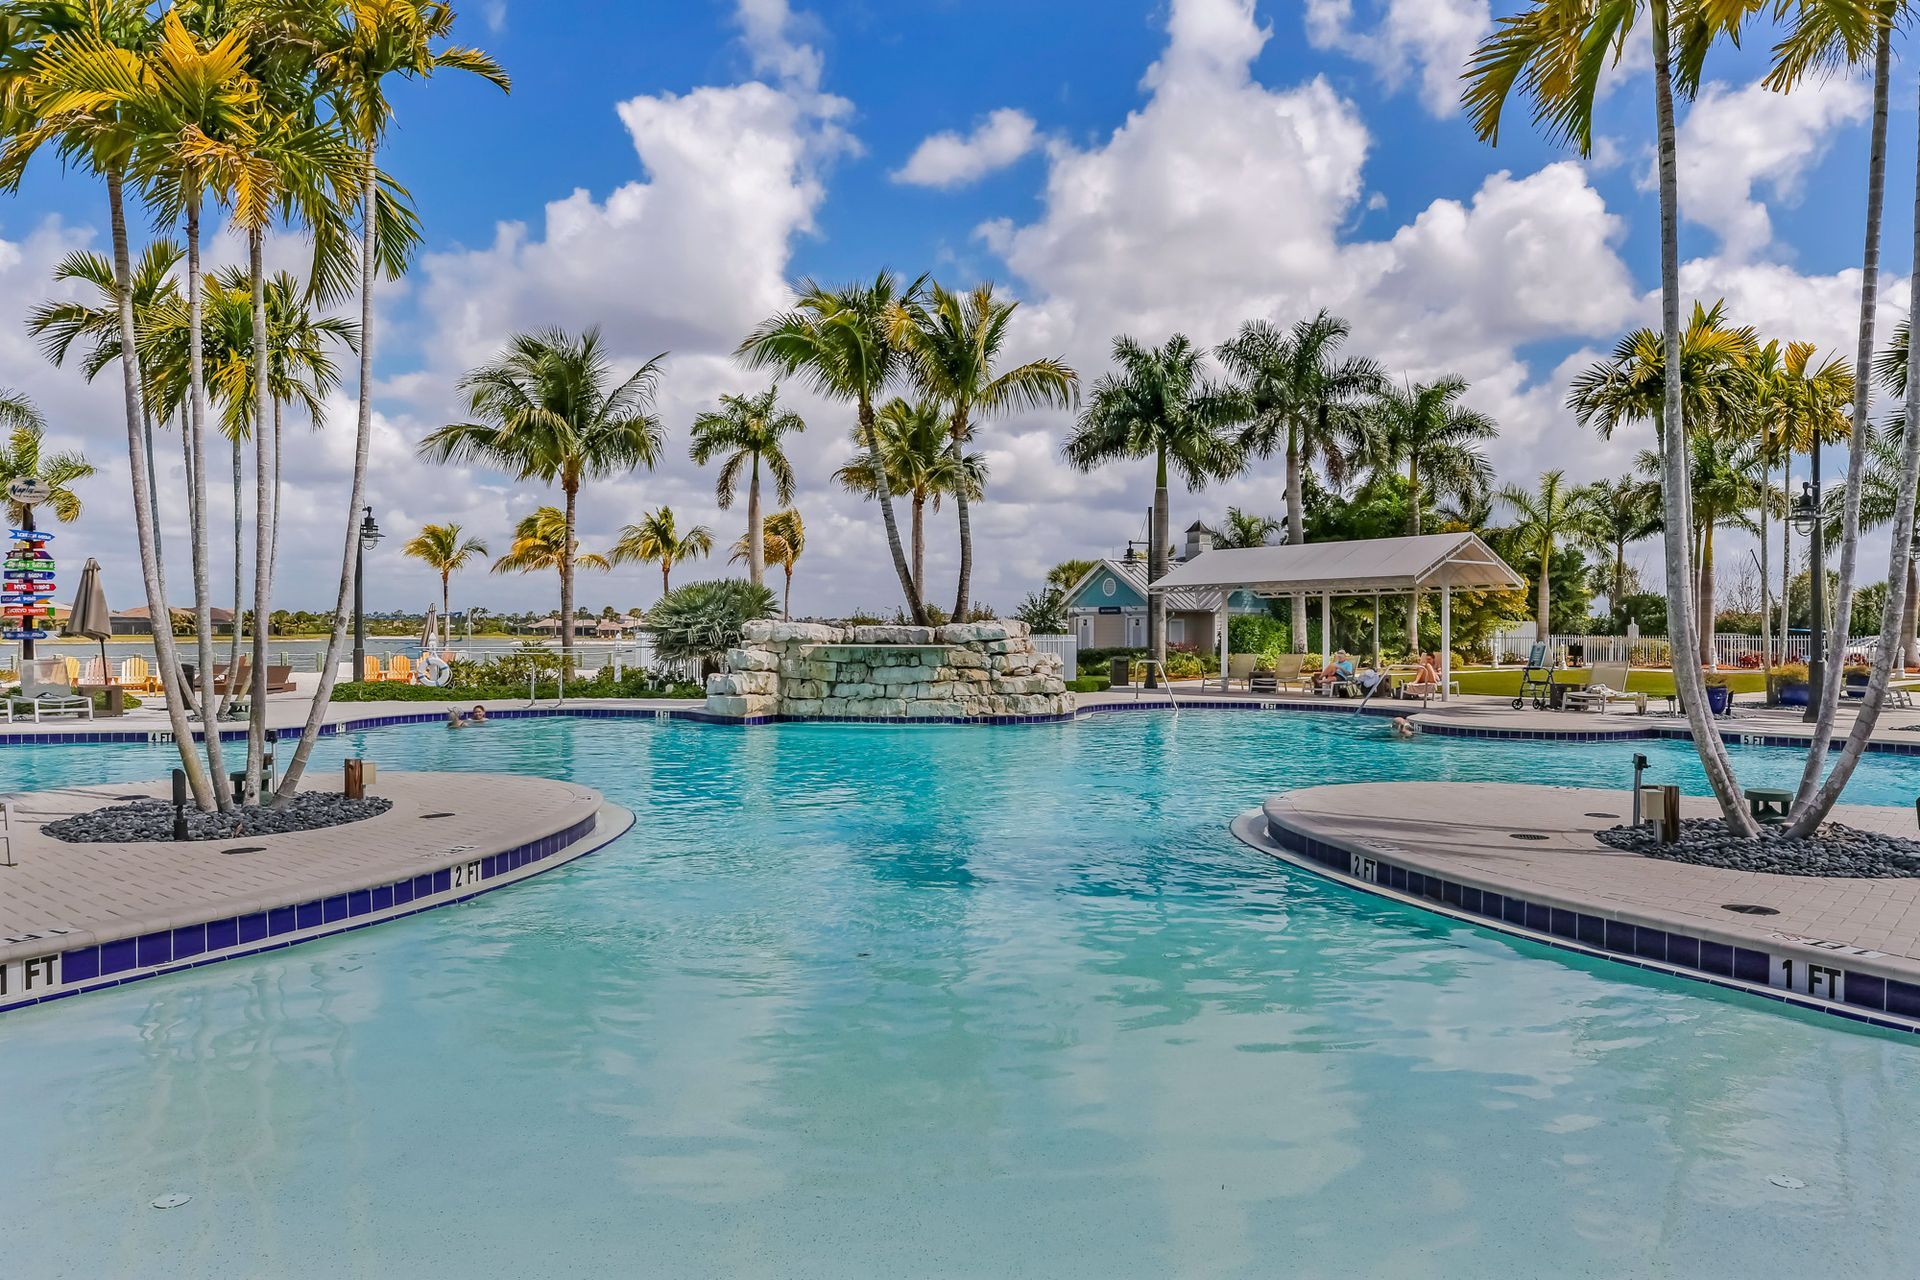 Photos shoot of Hotel Pool on in Marco Island Florida by Craig Westermany